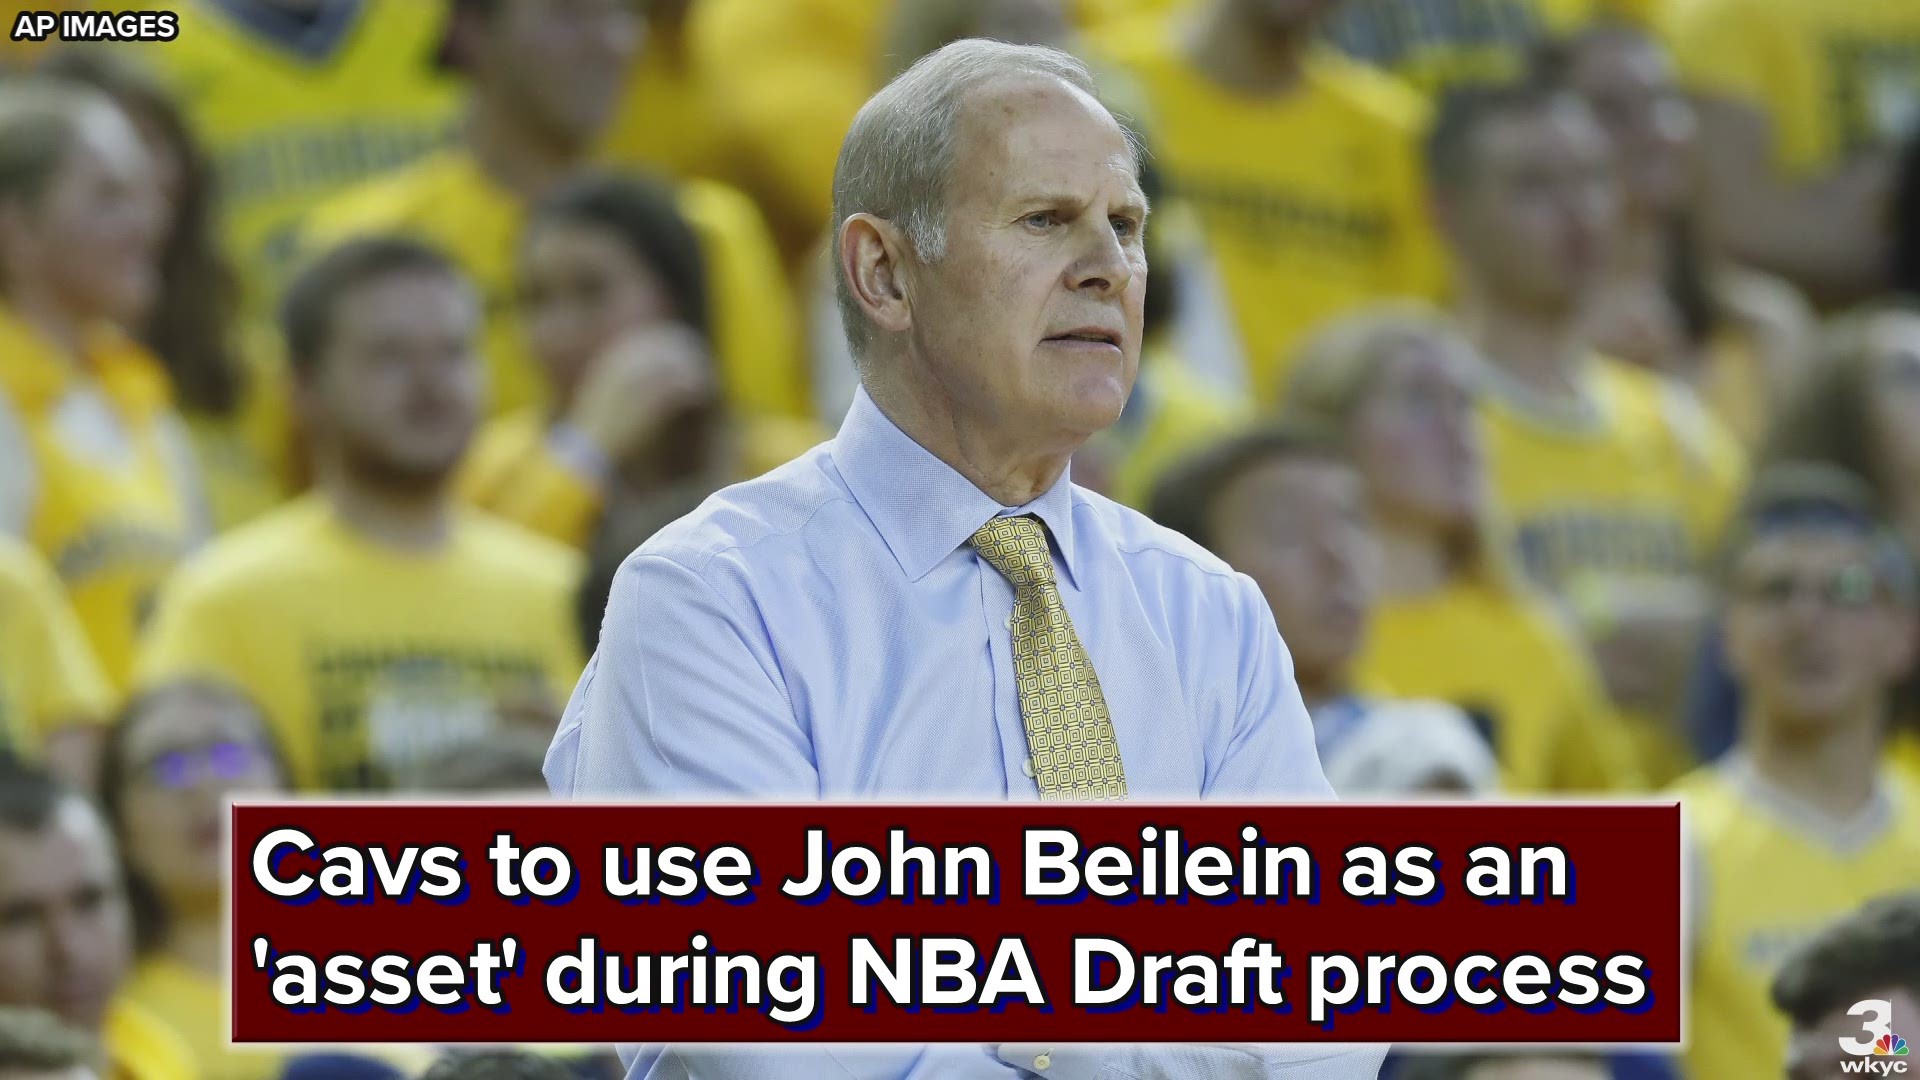 Given his experience at the college level, the Cleveland Cavaliers will lean on new head John Beilein when deciding who to select with the No. 5 pick in the 2019 NBA Draft.